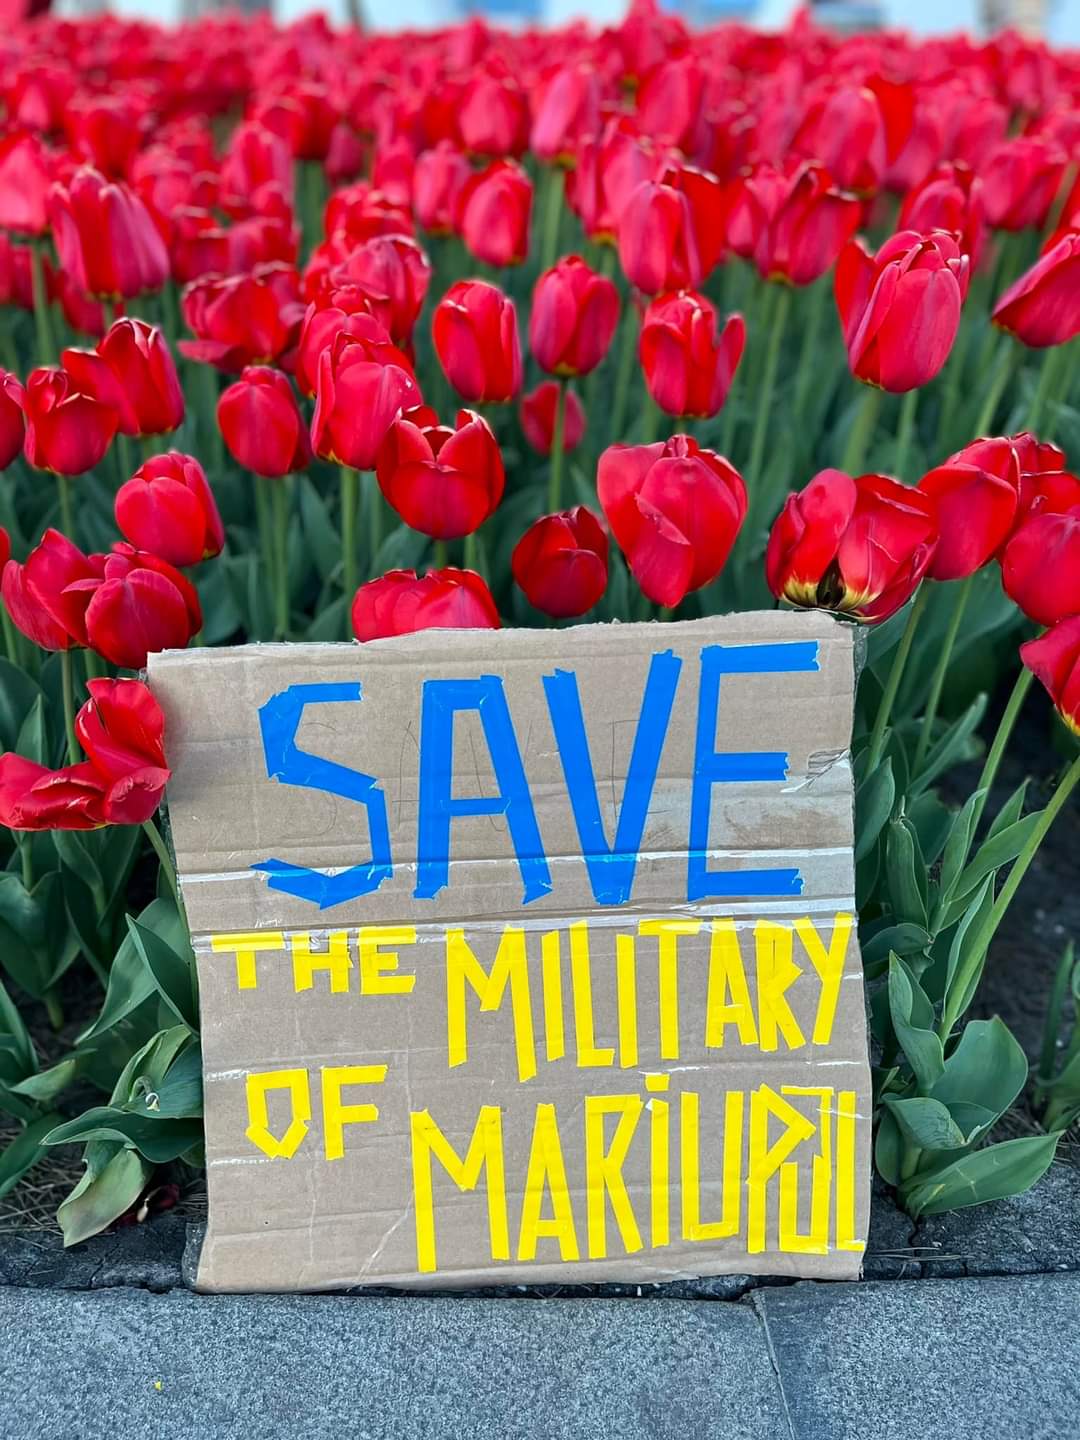 A picture of red tulips in bloom. In front of them is a sign with "Save The Military of Mariupol" painted on it in Ukrainian Blue and Yellow. Save is in blue, the rest in yellow.